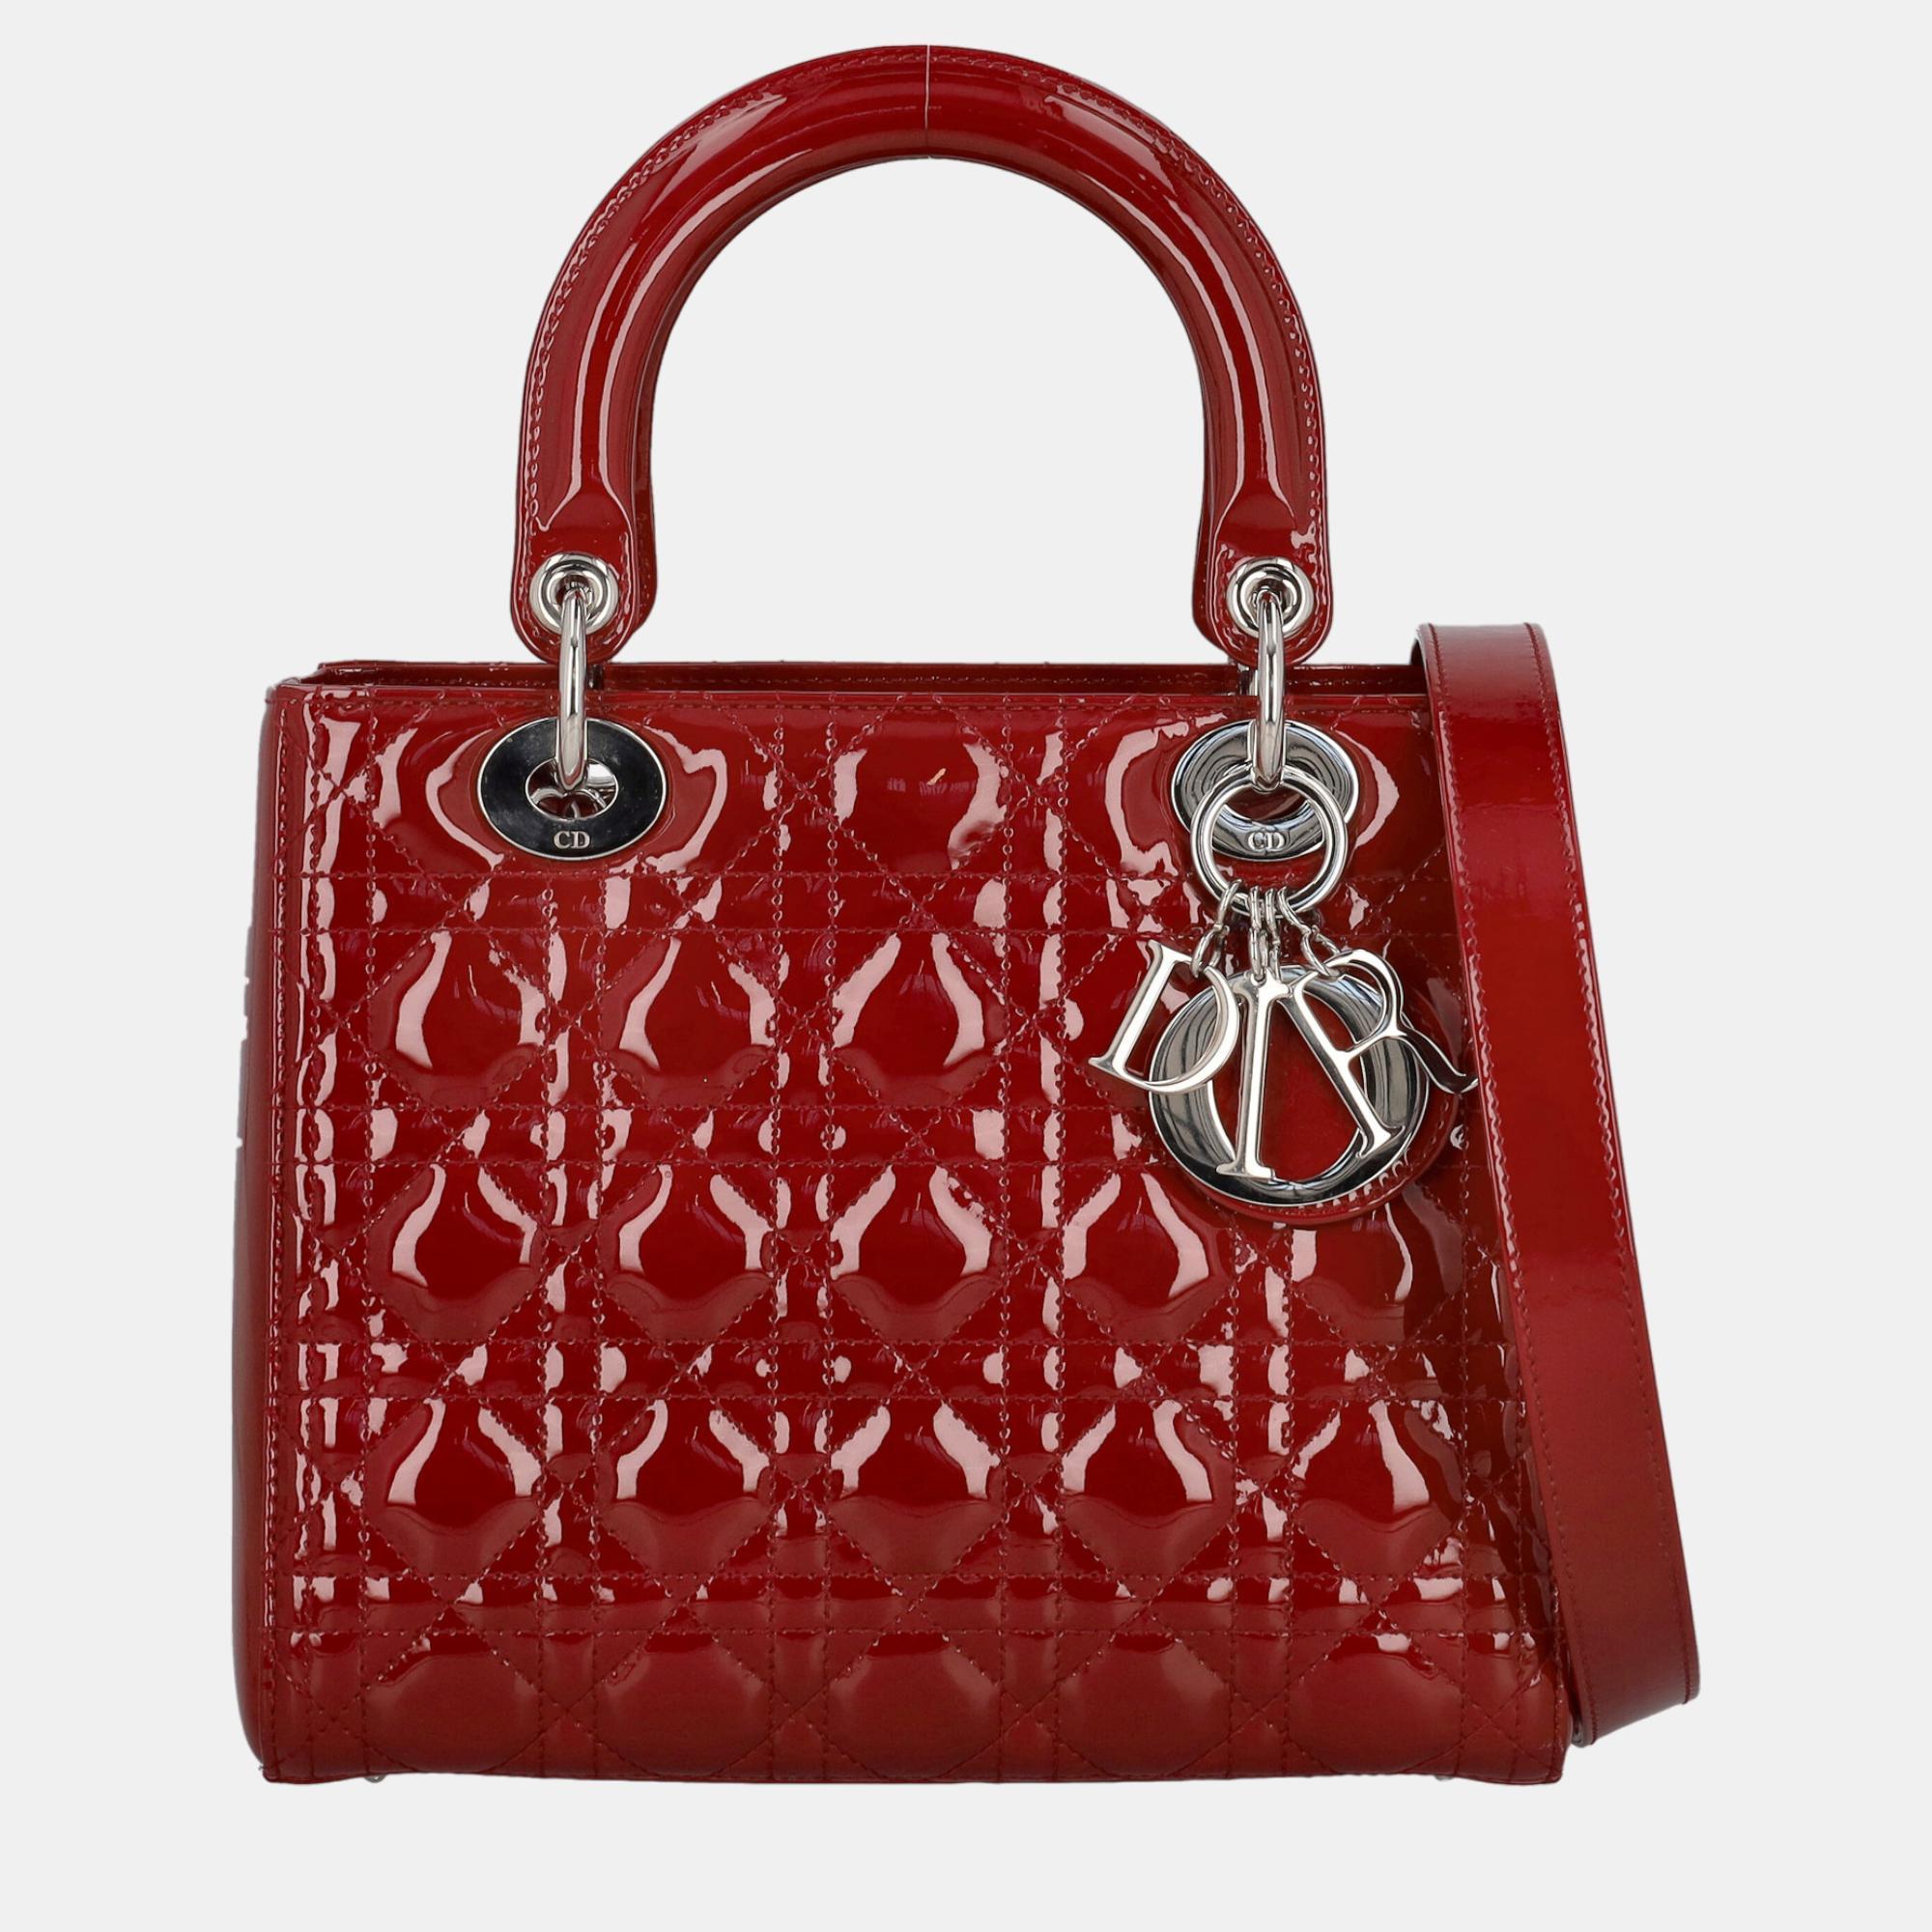 Dior Lady Dior - Women's Leather Tote Bag - Red - One Size